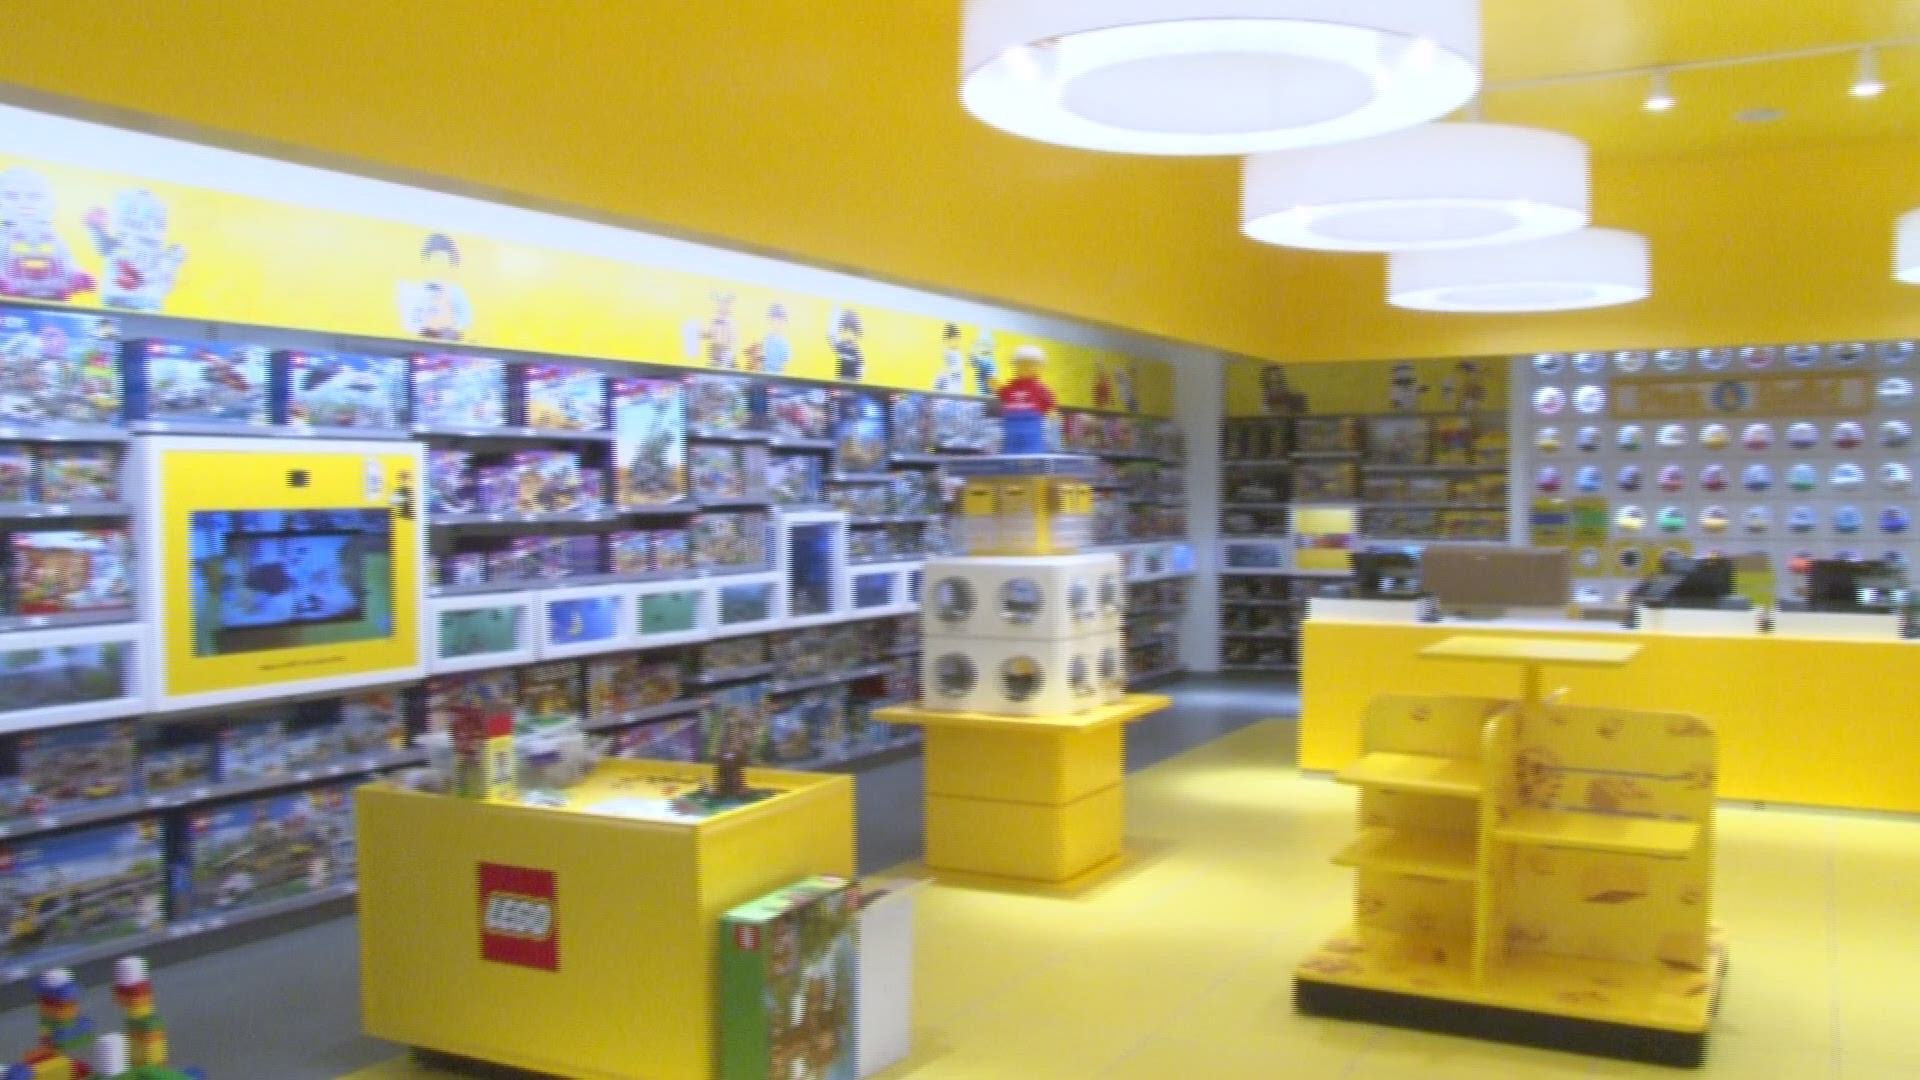 Embrace your inner at the new Jacksonville LEGO store |